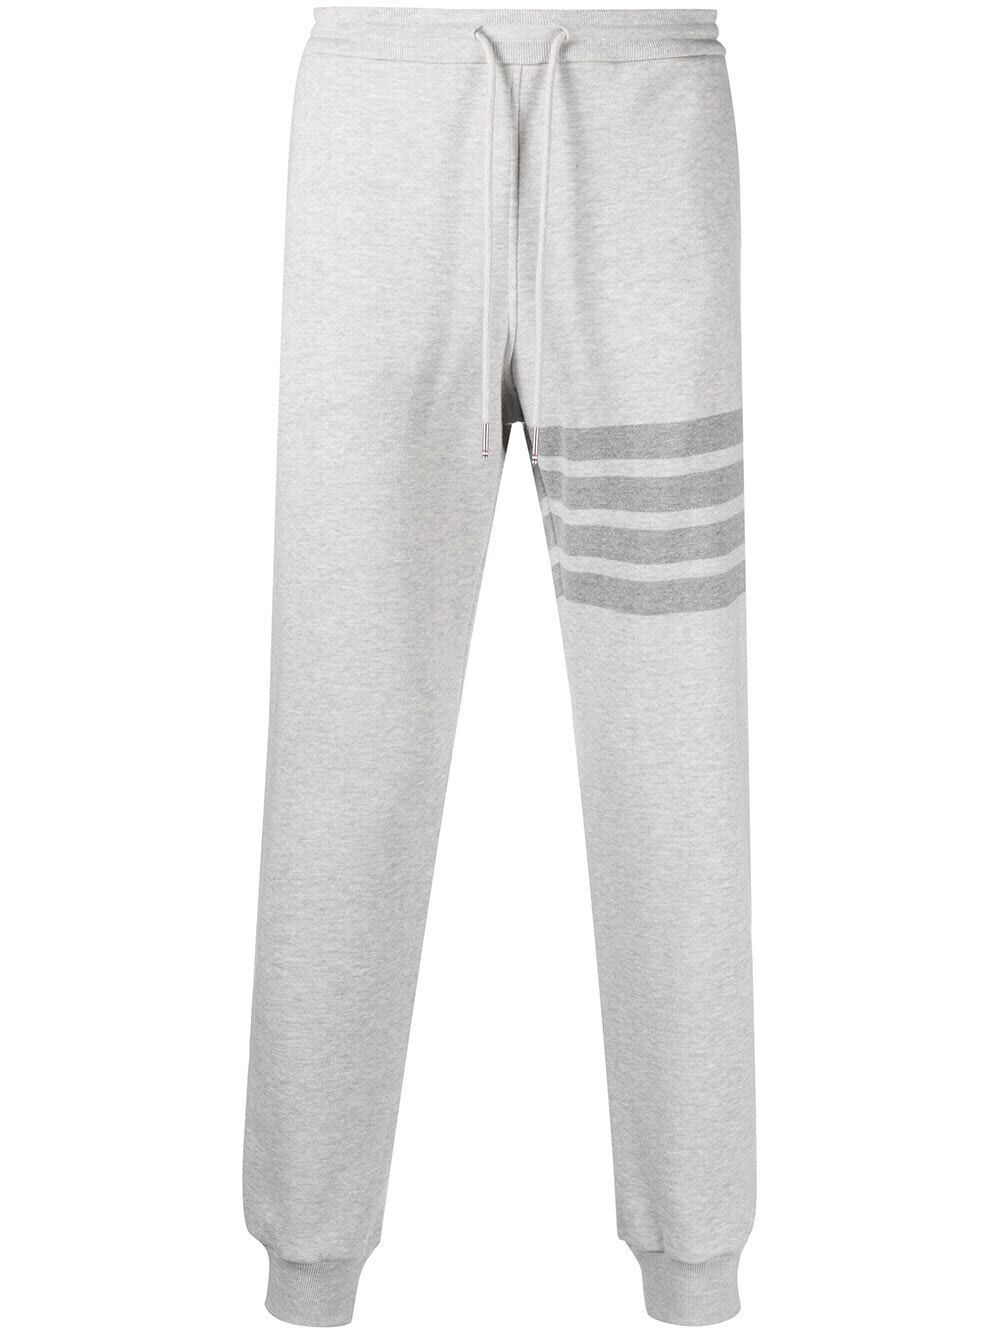 SWEATPANTS IN CLASSIC LOOPBACK WITH ENGINEERED 4 BAR STRIPE - 1